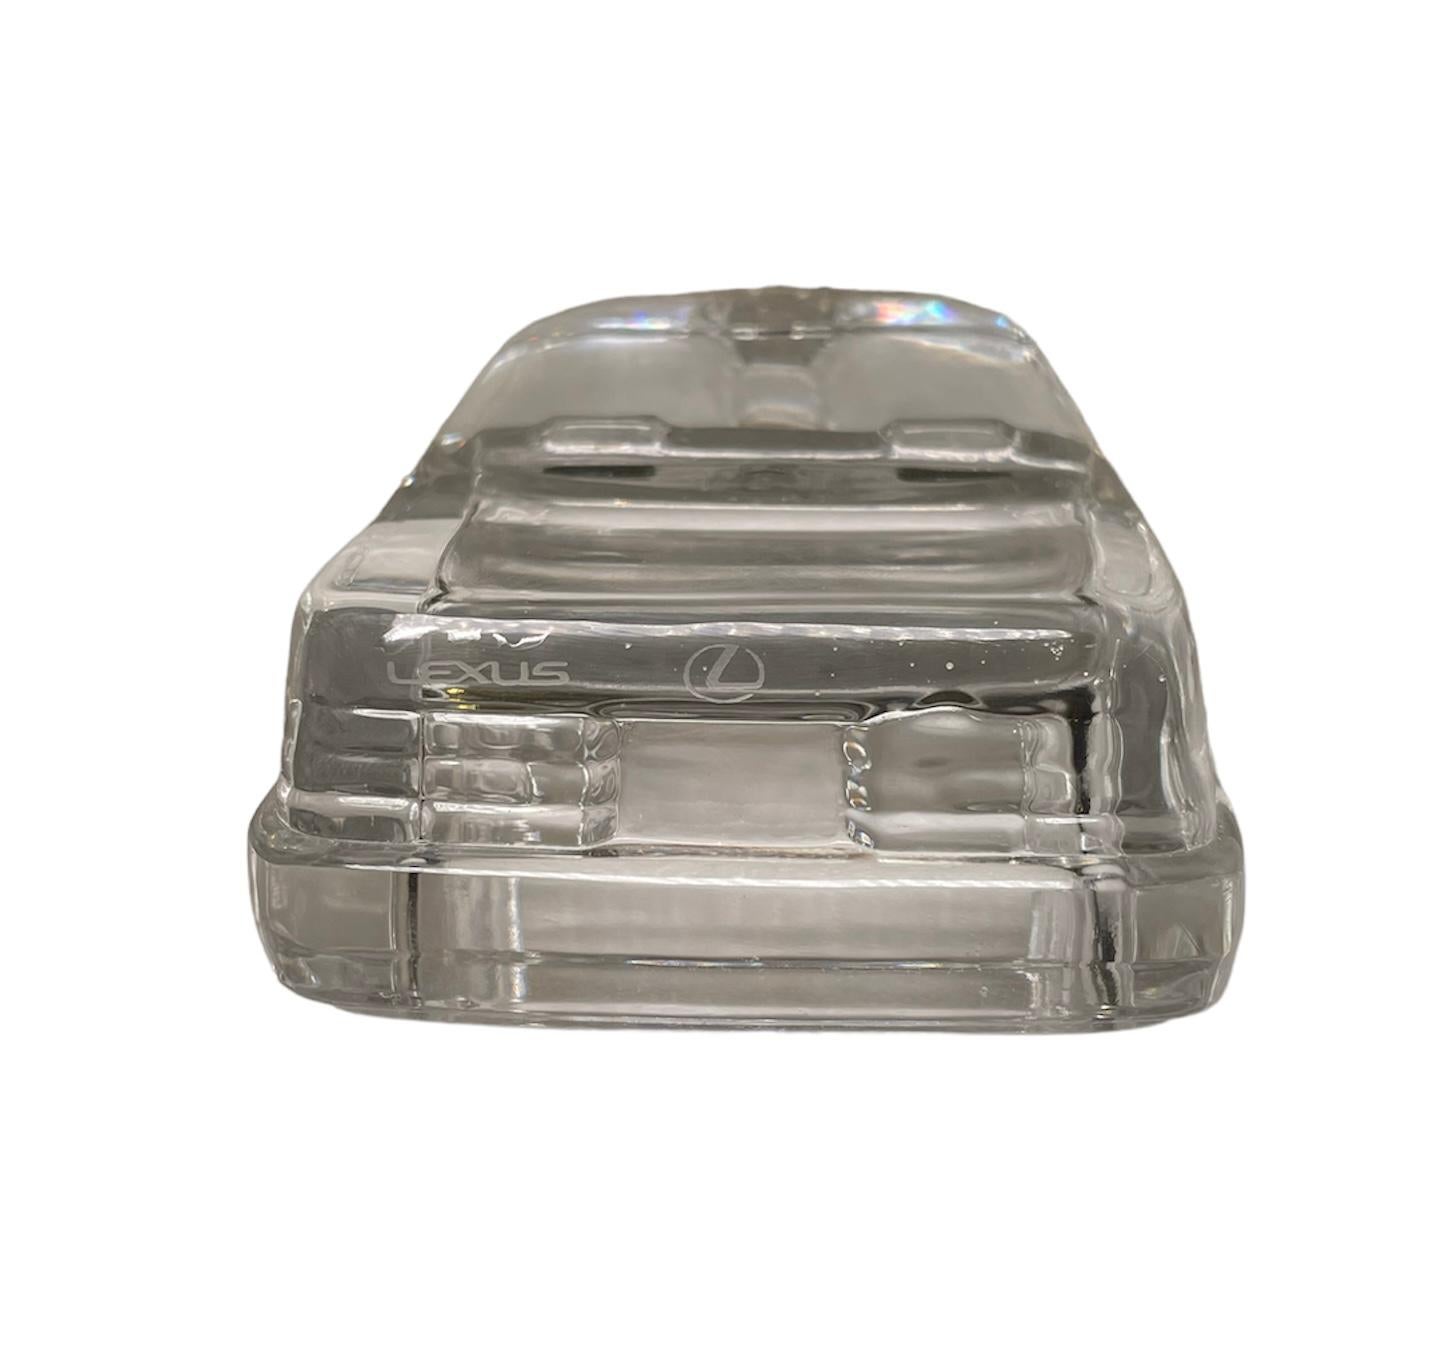 1989-90’s Clear Crystal Lexus LS 400 Car Paperweight For Sale 6